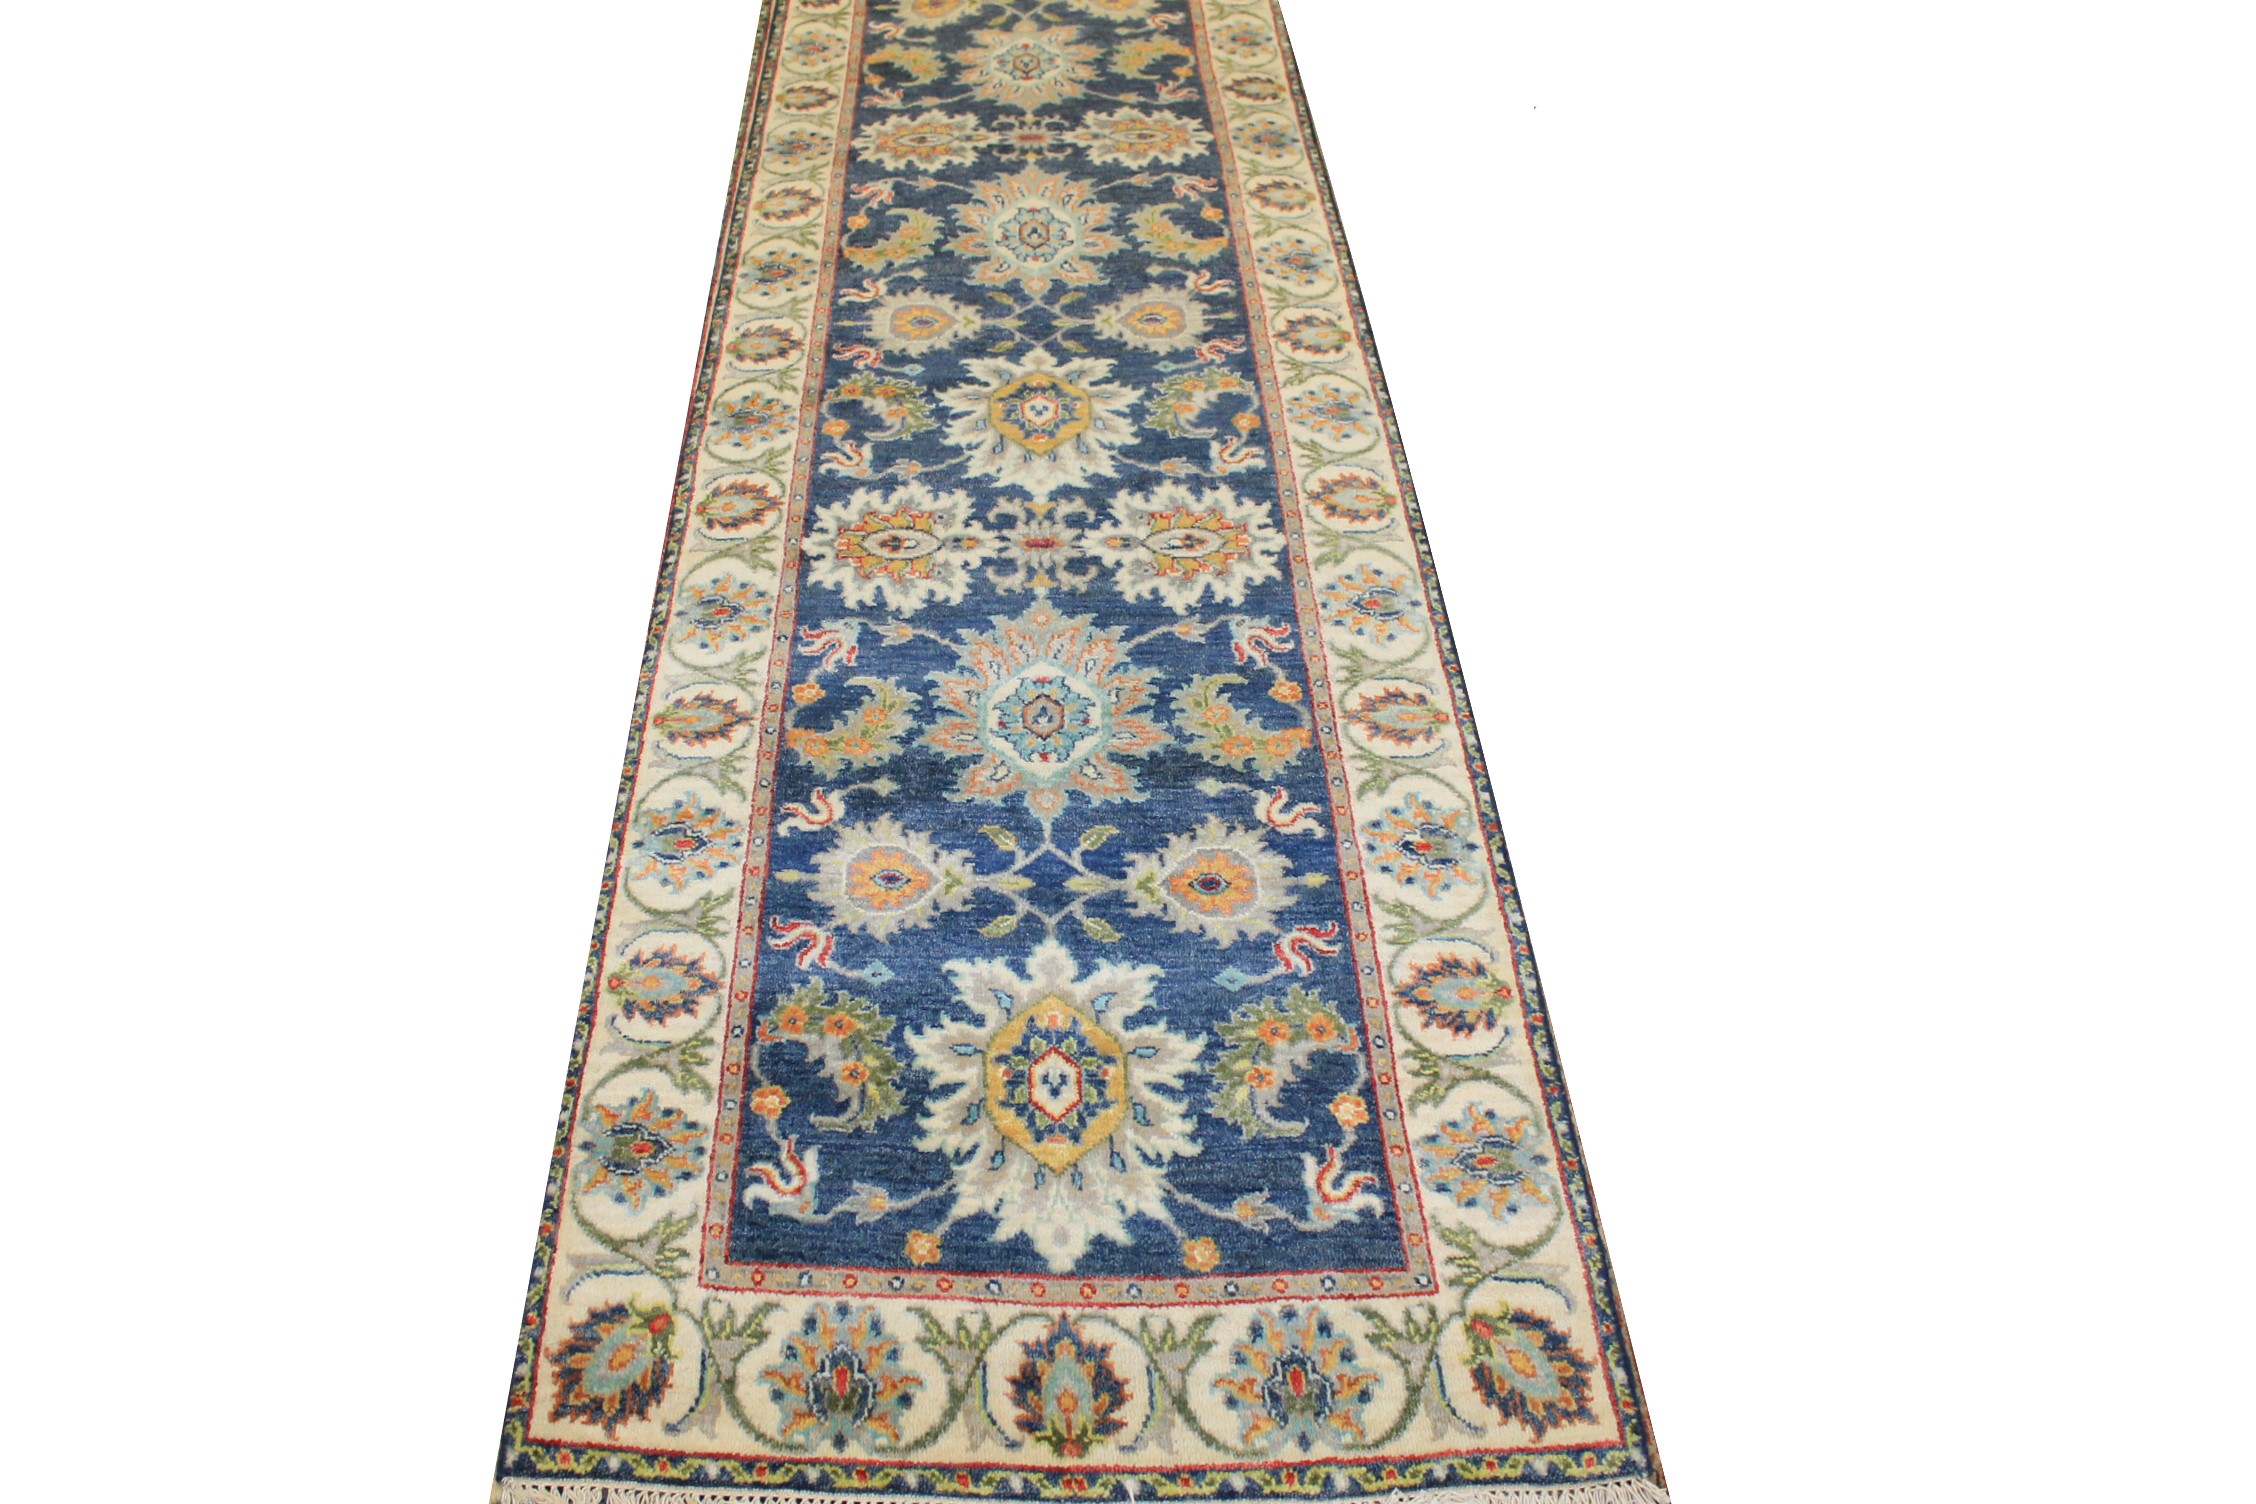 12 ft. Runner Traditional Hand Knotted Wool Area Rug - MR025008